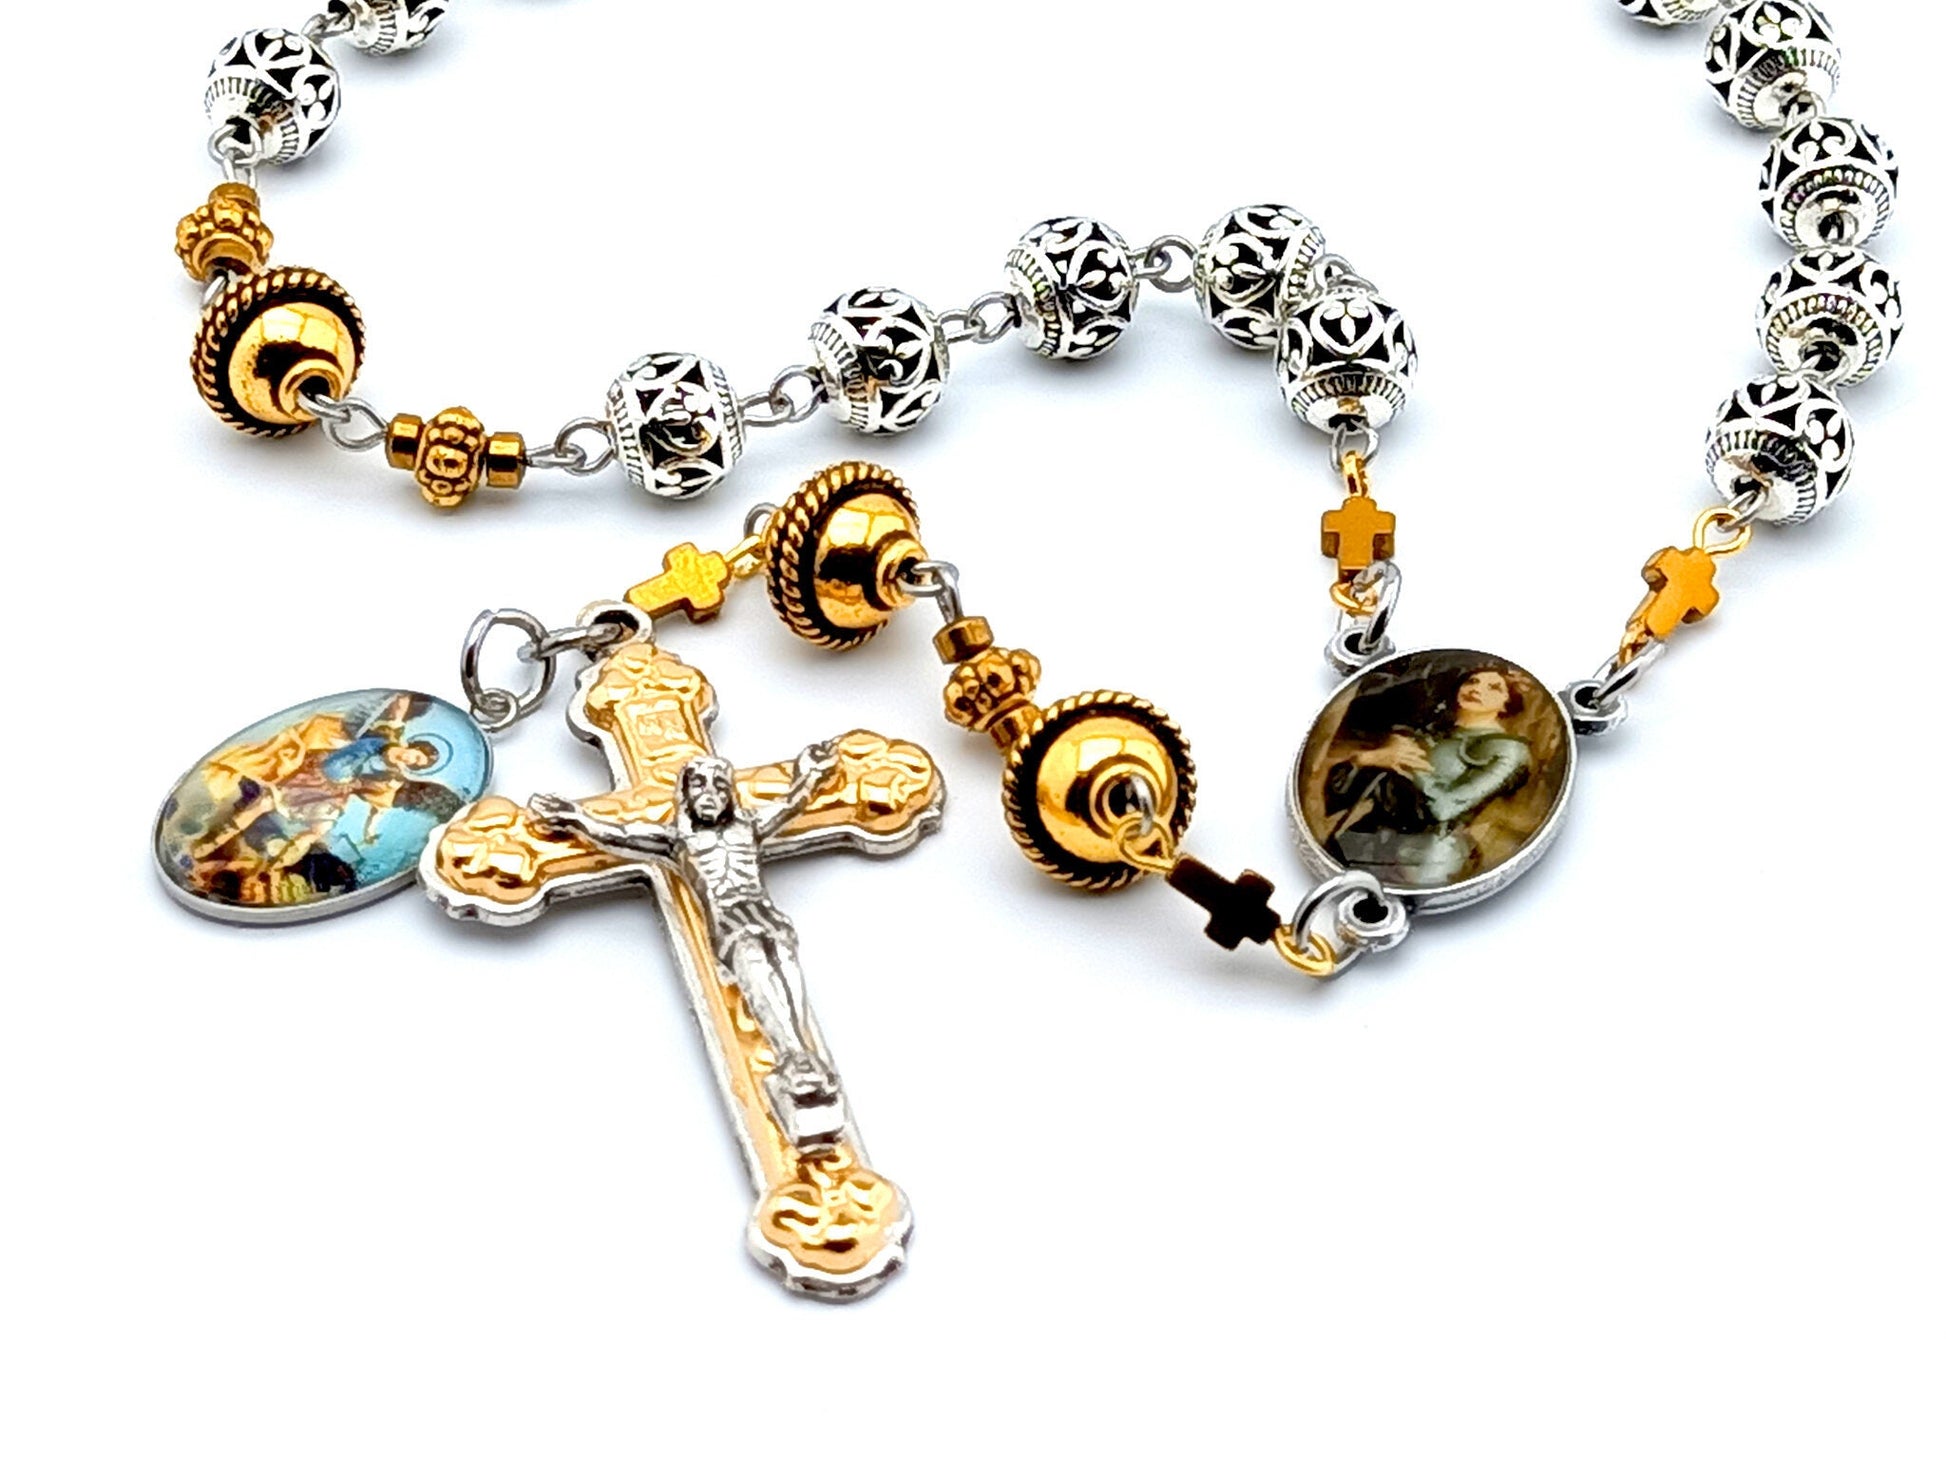 Saint Joan of Arc unique rosary beads prayer chaplet with silver and golden beads, suilver and gold crucifixand picture medals.